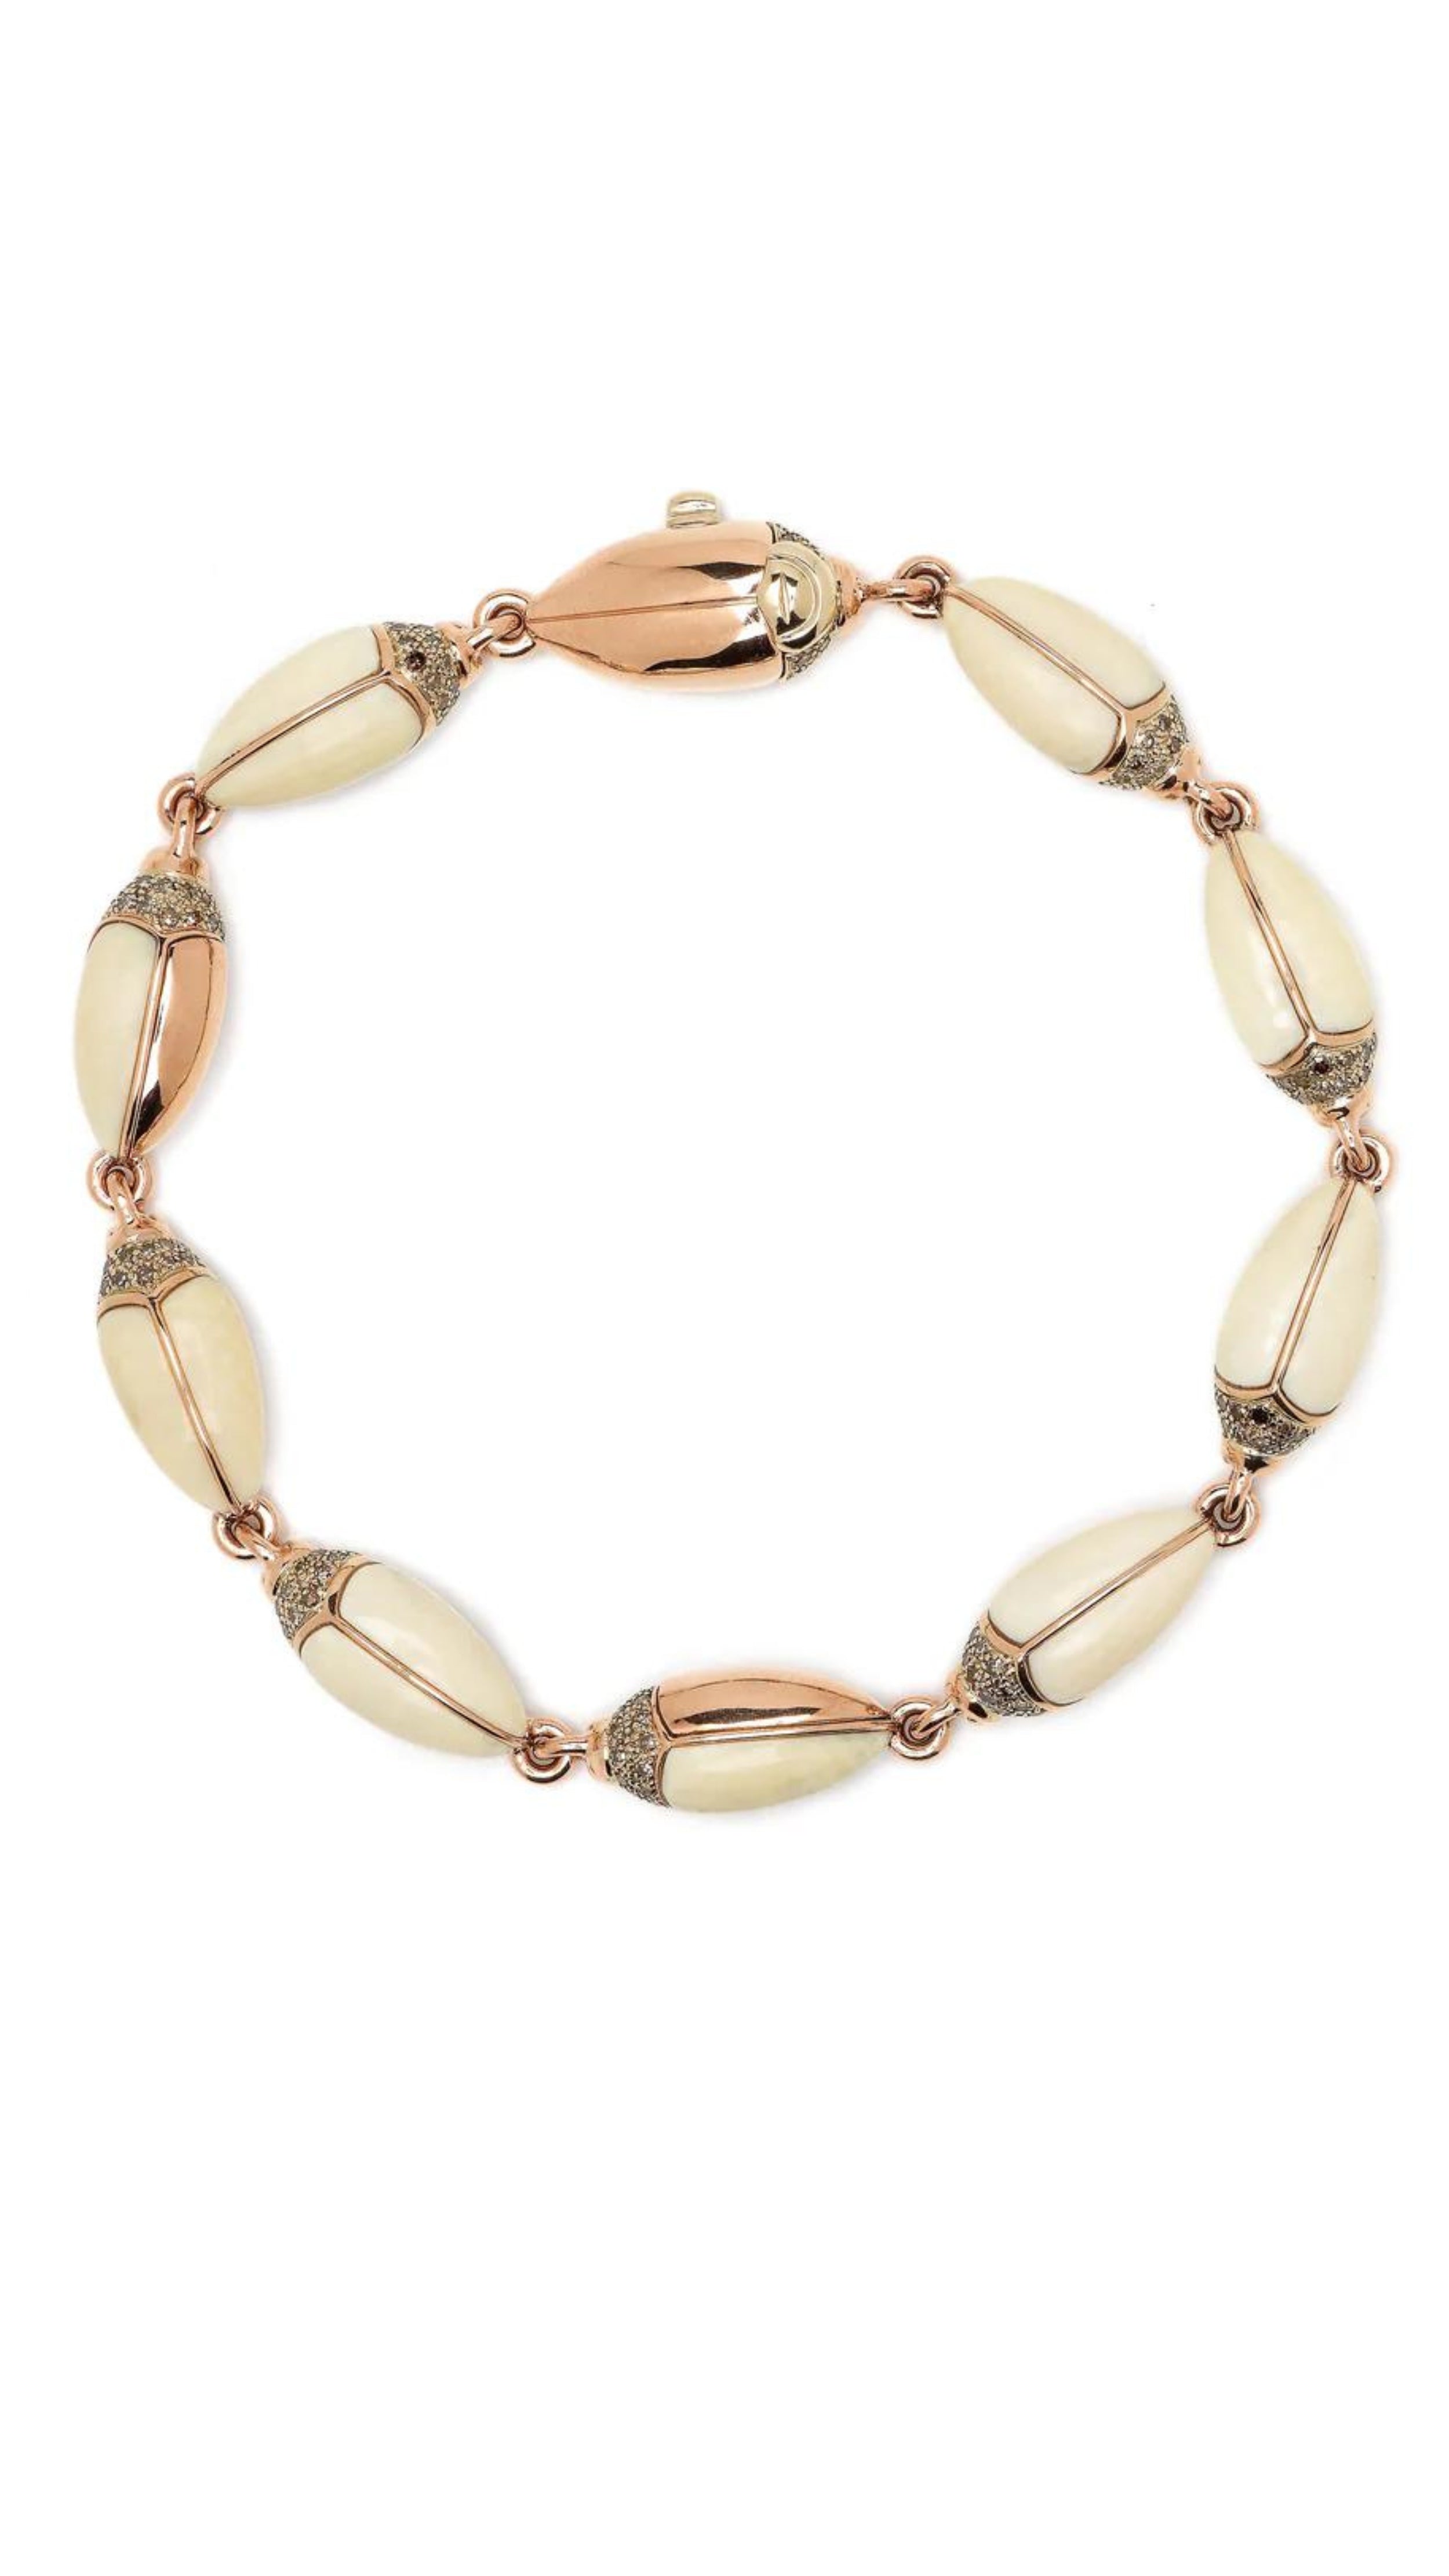 Bibi van der Velden Winter Mammoth Scarab Bracelet is made from creamy tones of polished and carved mammoth tusk, 18k yellow gold, 925 sterling silver, and brown diamonds. Individual scarabs are linked together. Shown from above.